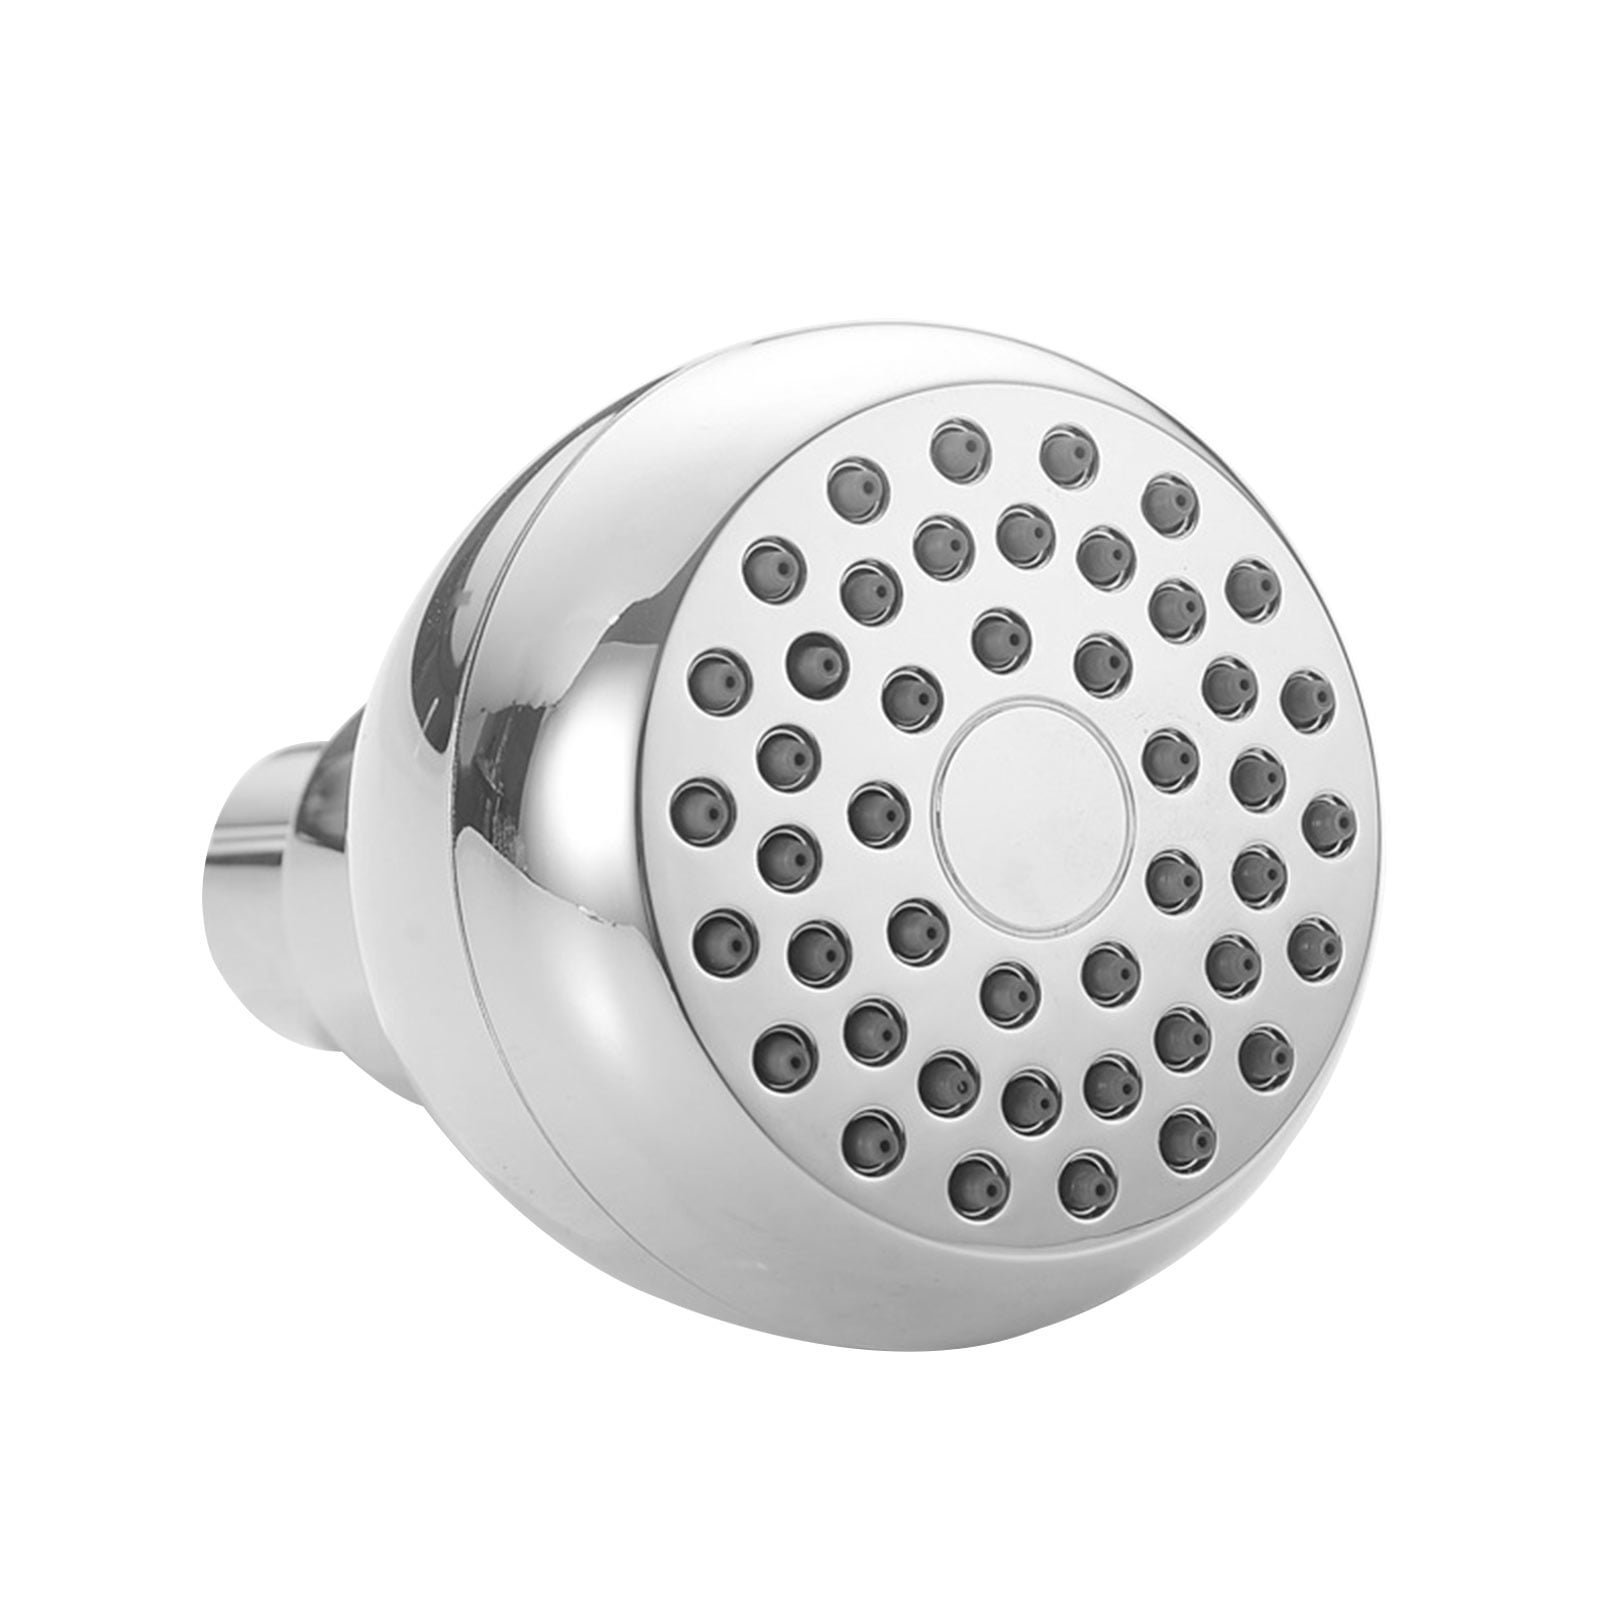 Showerhead 3 in 1-Spray Round Wall Mount in Chrome with Self-Cleaning Nozzles 